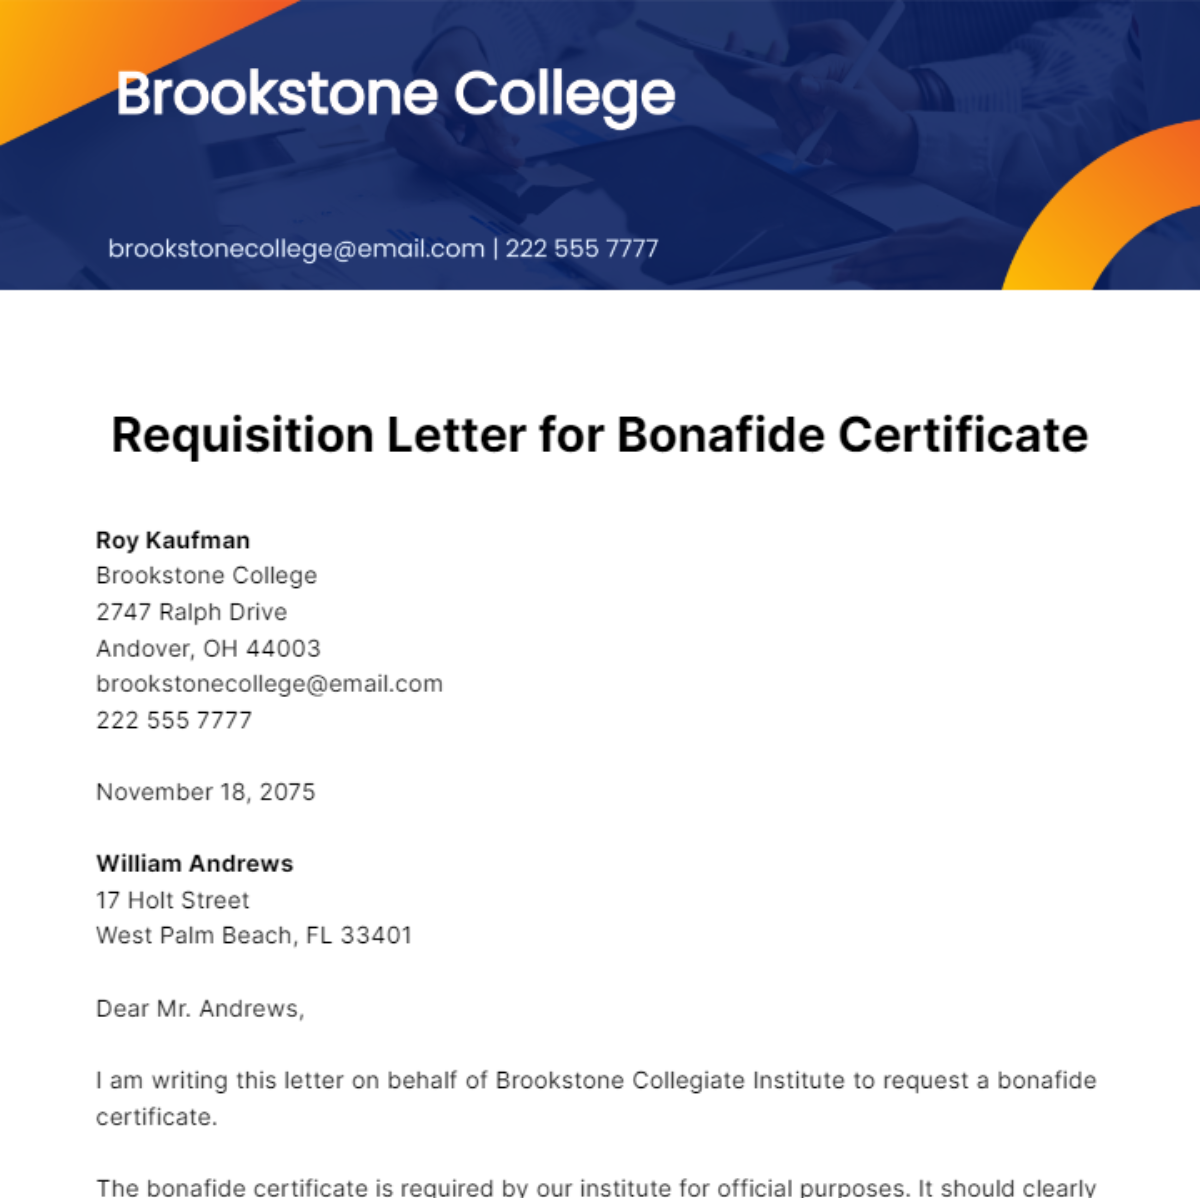 Requisition Letter for Bonafide Certificate Template